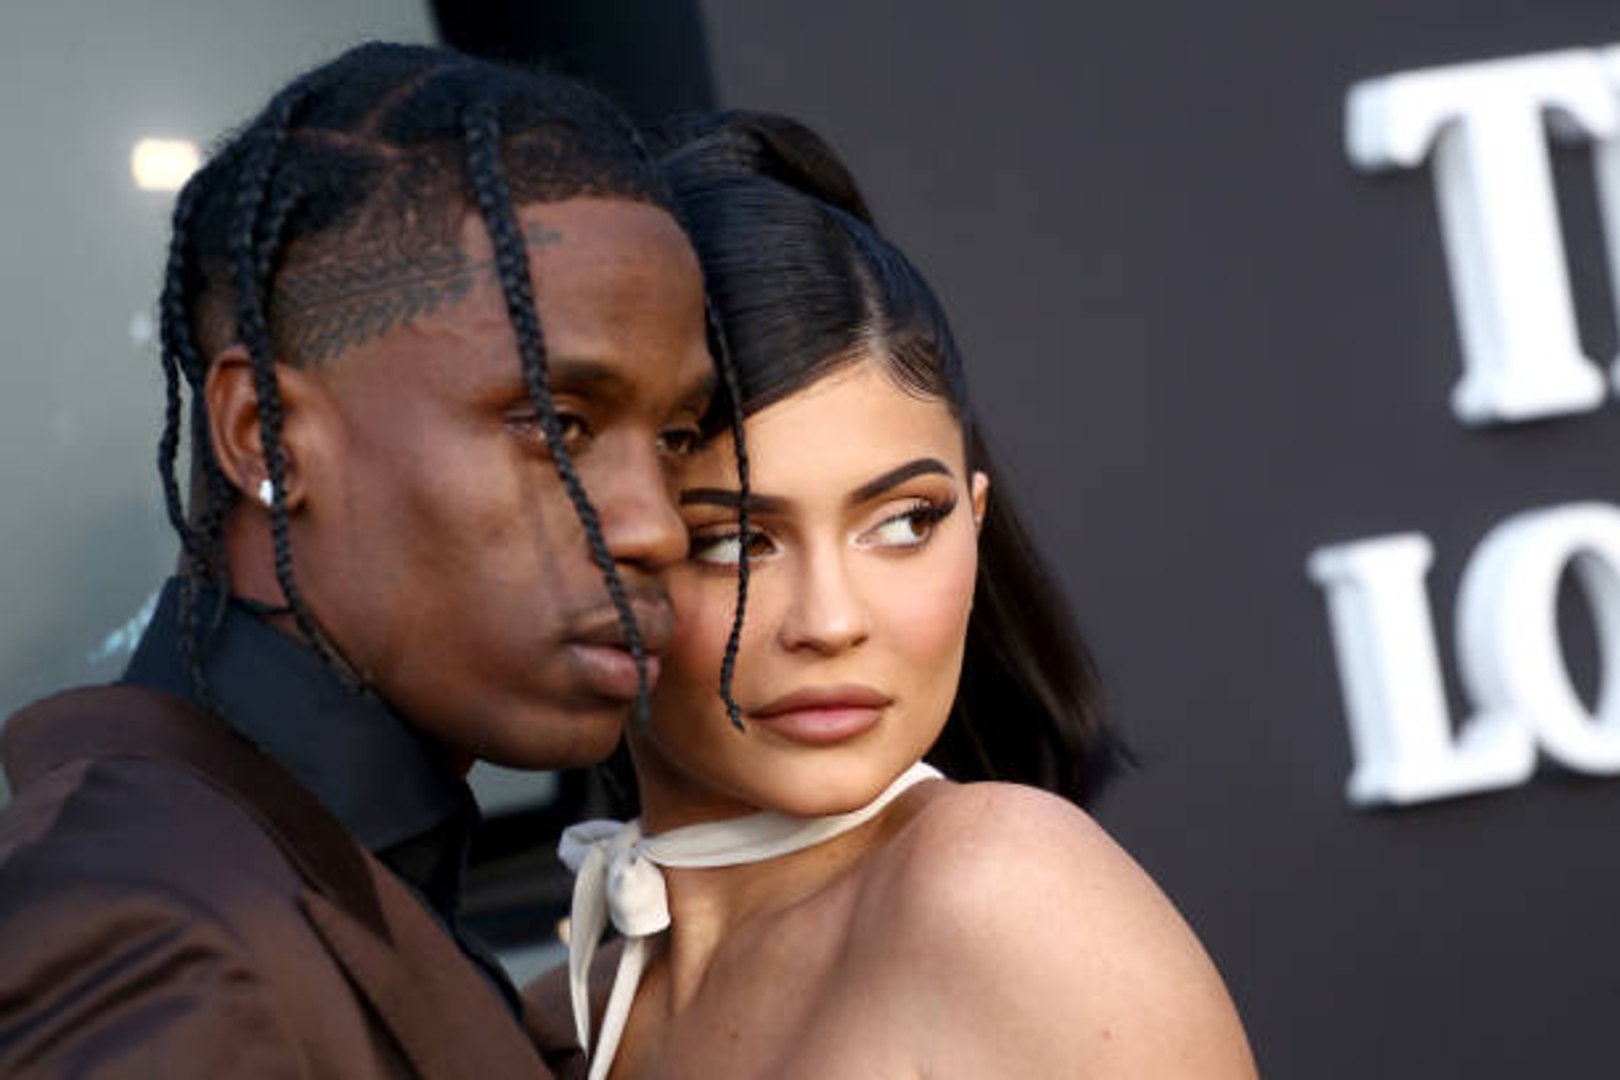 Kylie Jenner and Travis Scott Are 'Taking Some Time Apart'